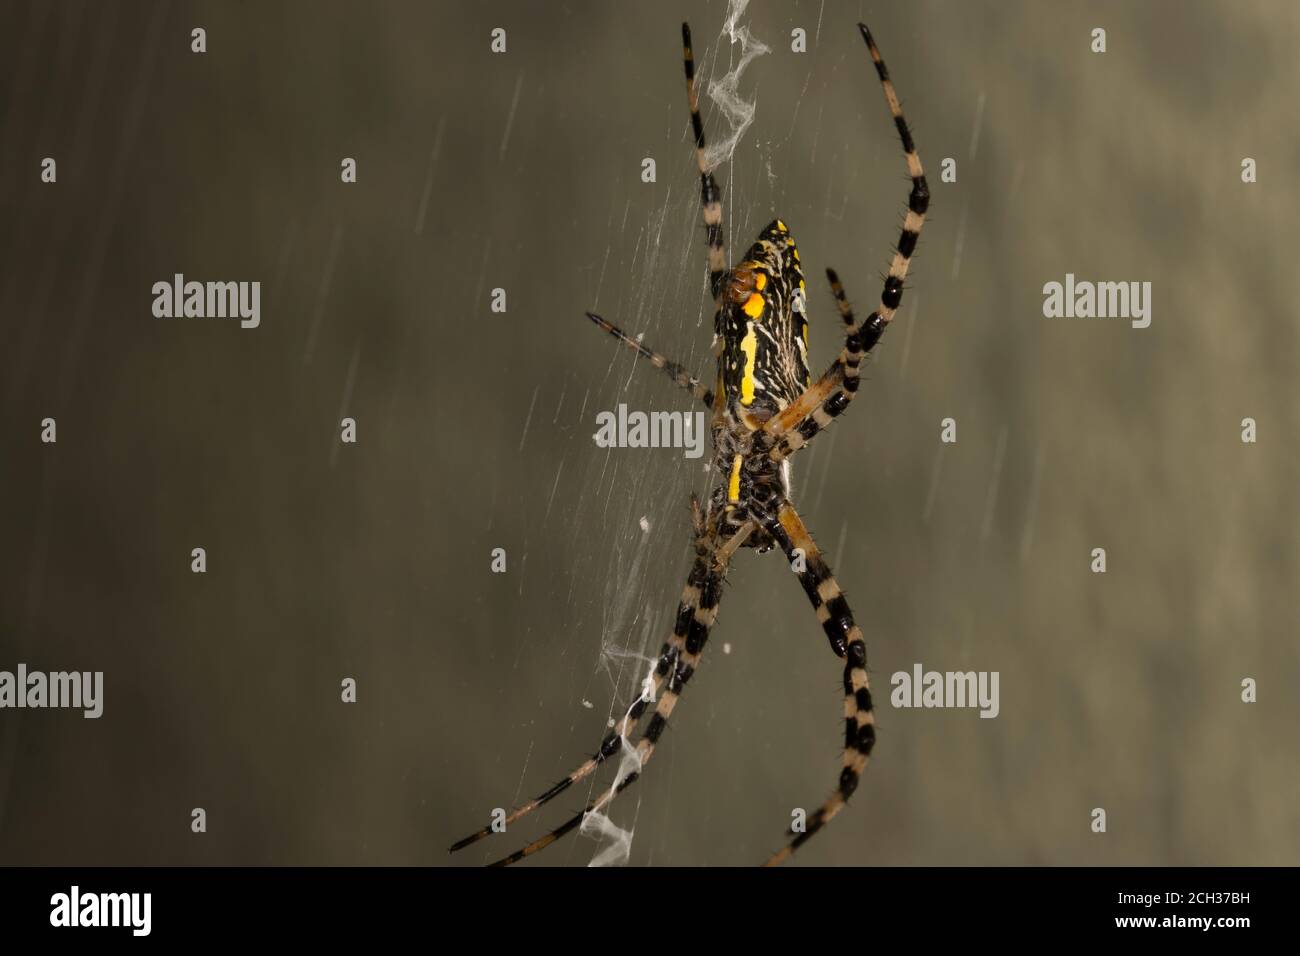 A Black and Yellow Garden Spider, Argiope aurantia, in its web, ventral view Stock Photo